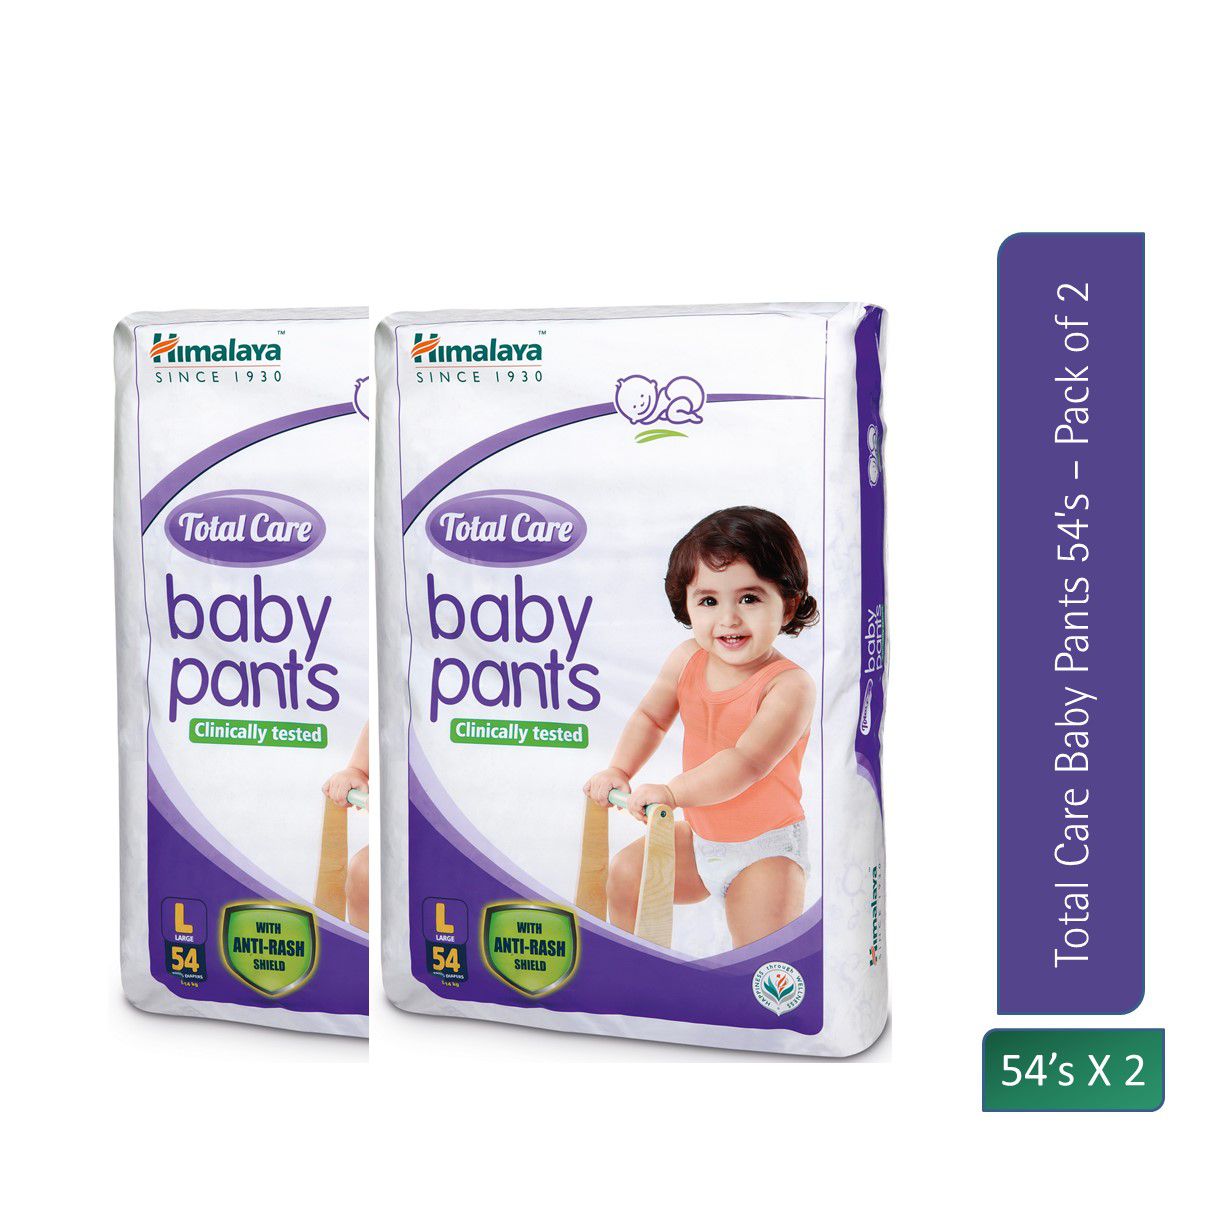     			Himalaya Total Care Large Size Baby Pants Diapers (L-54 Count) (Pack of 2)